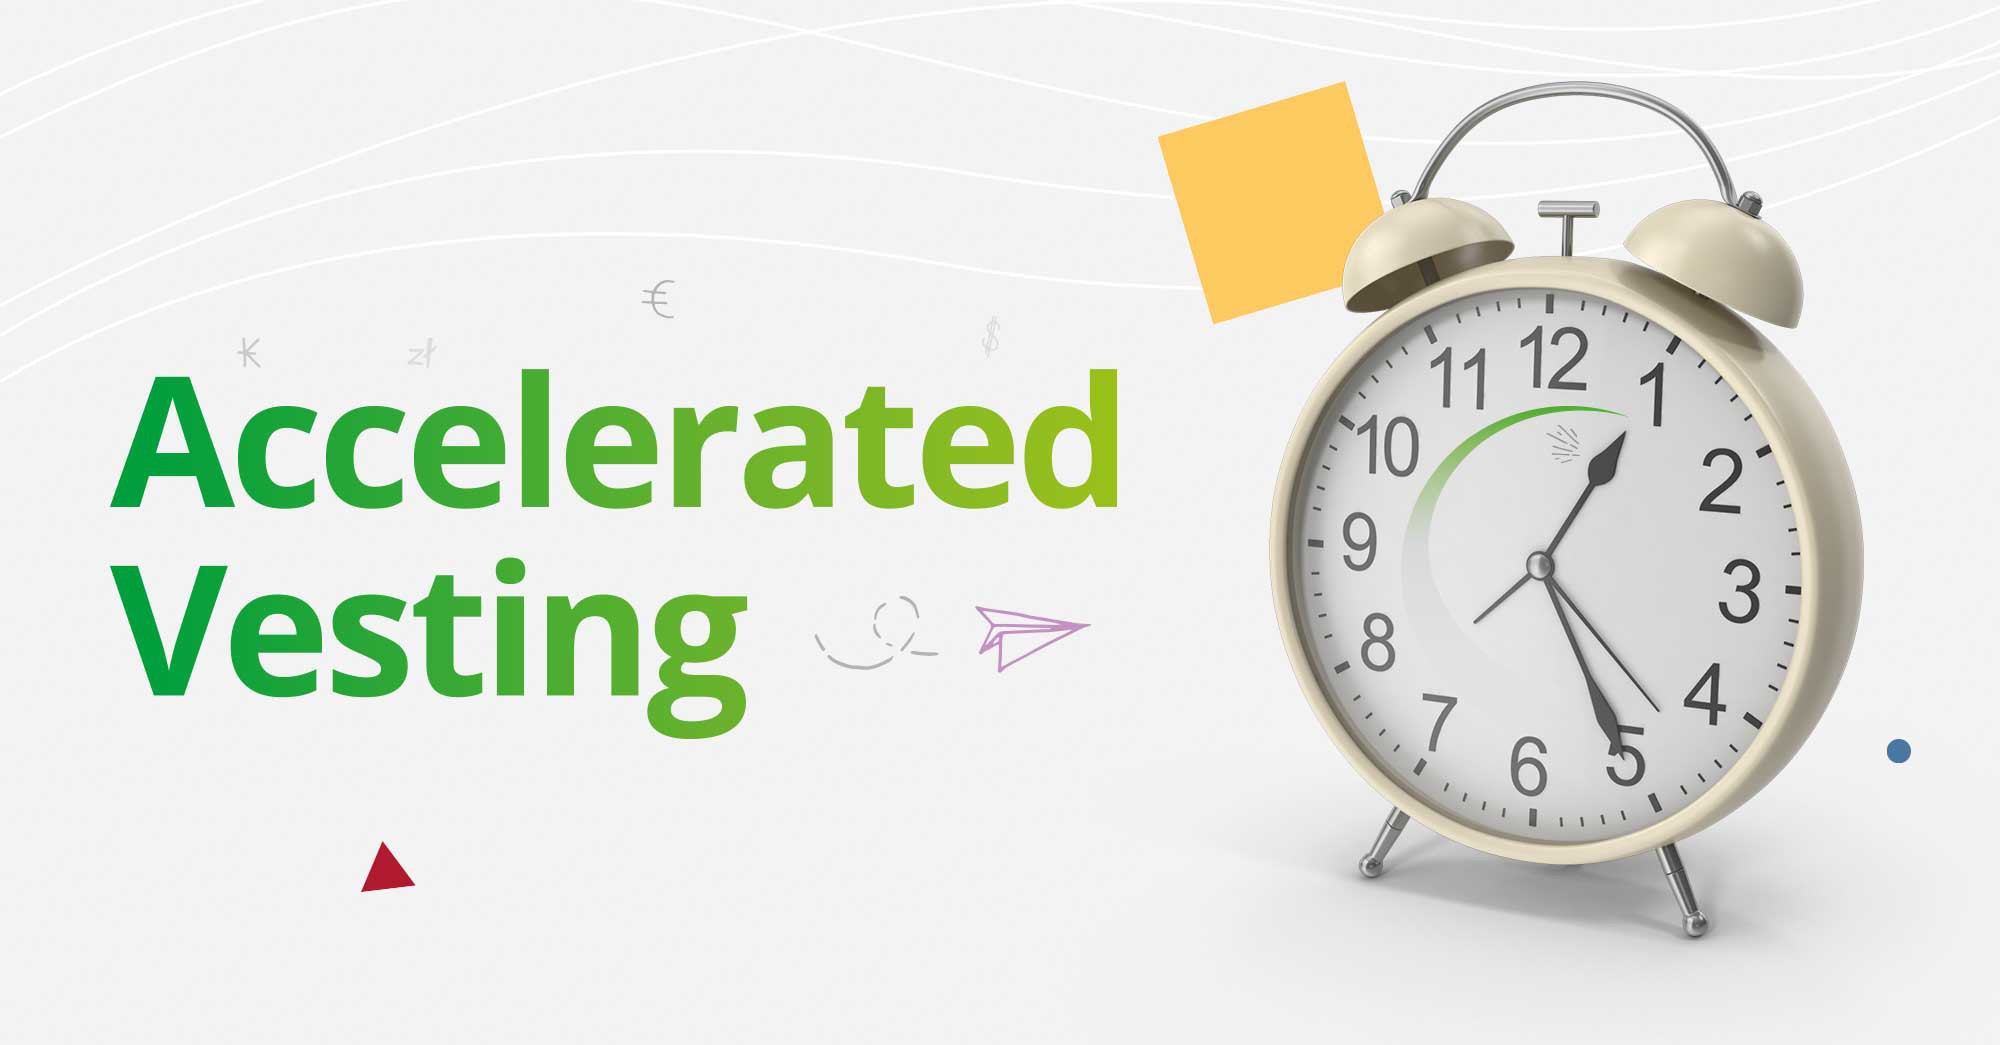 Accelerated Vesting: How speeding up access could slow down employee attrition